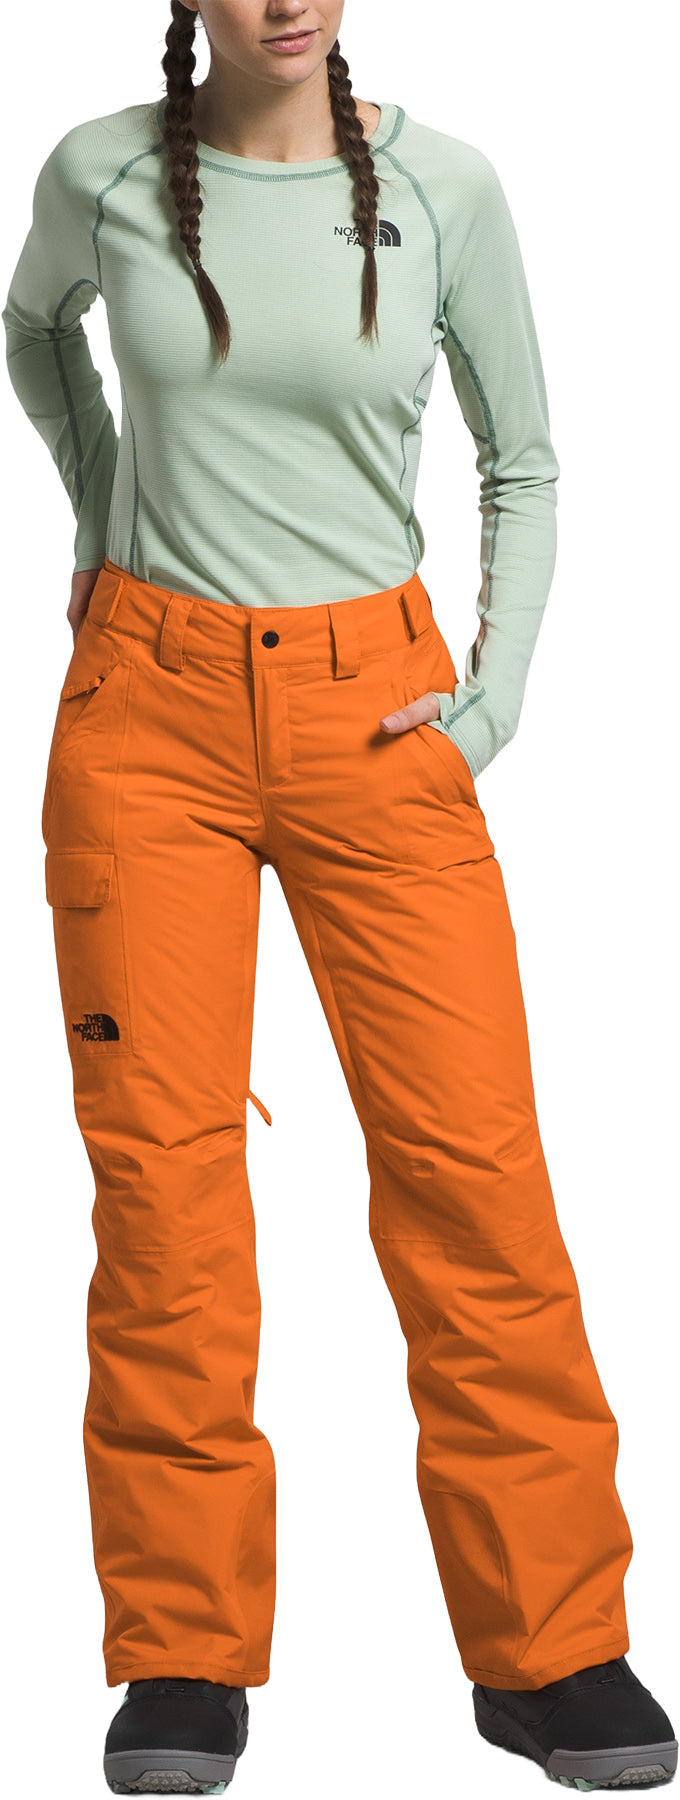 The North Face Women's Aboutaday Pants - Chamois Orange regular Large